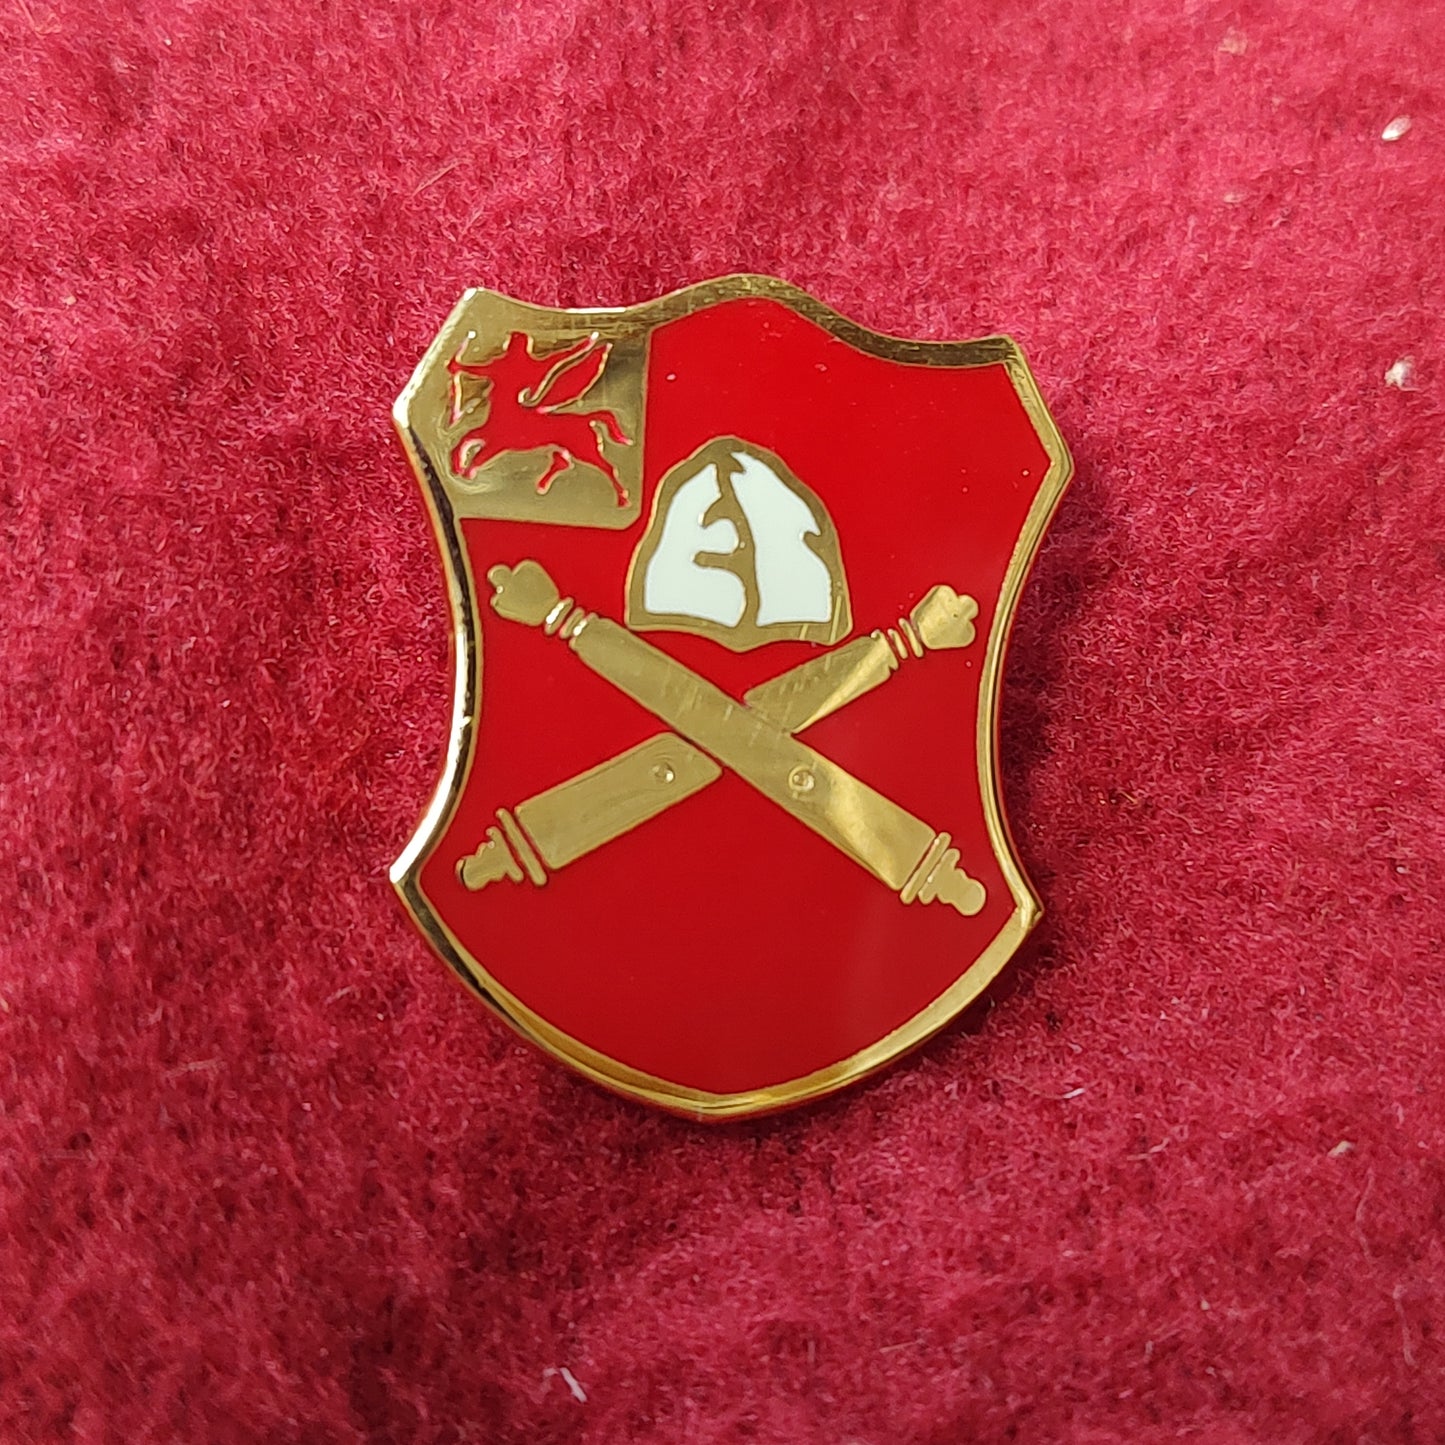 VINTAGE US Army 10th FIELD ARTILLERY Badge Pin (19CR53)